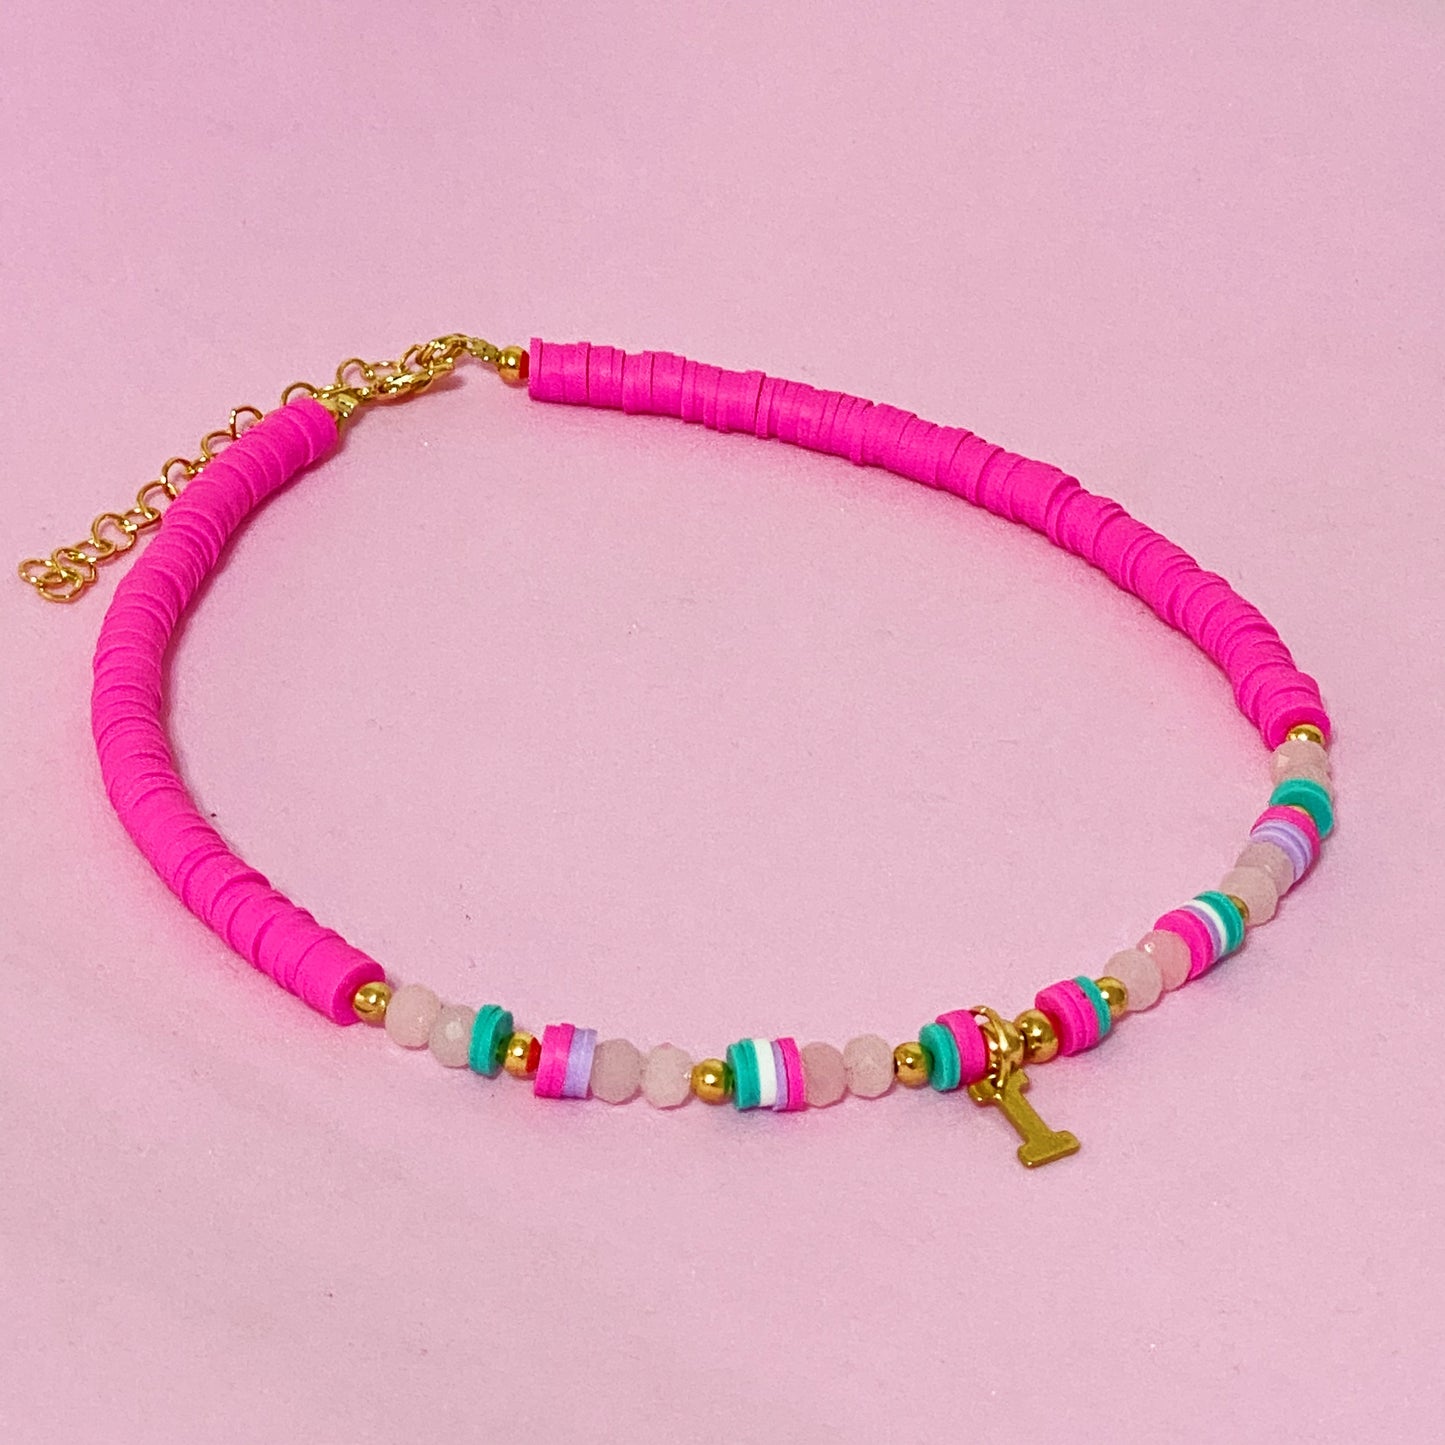 Pinky Necklace con o sin inicial - ROCKmint